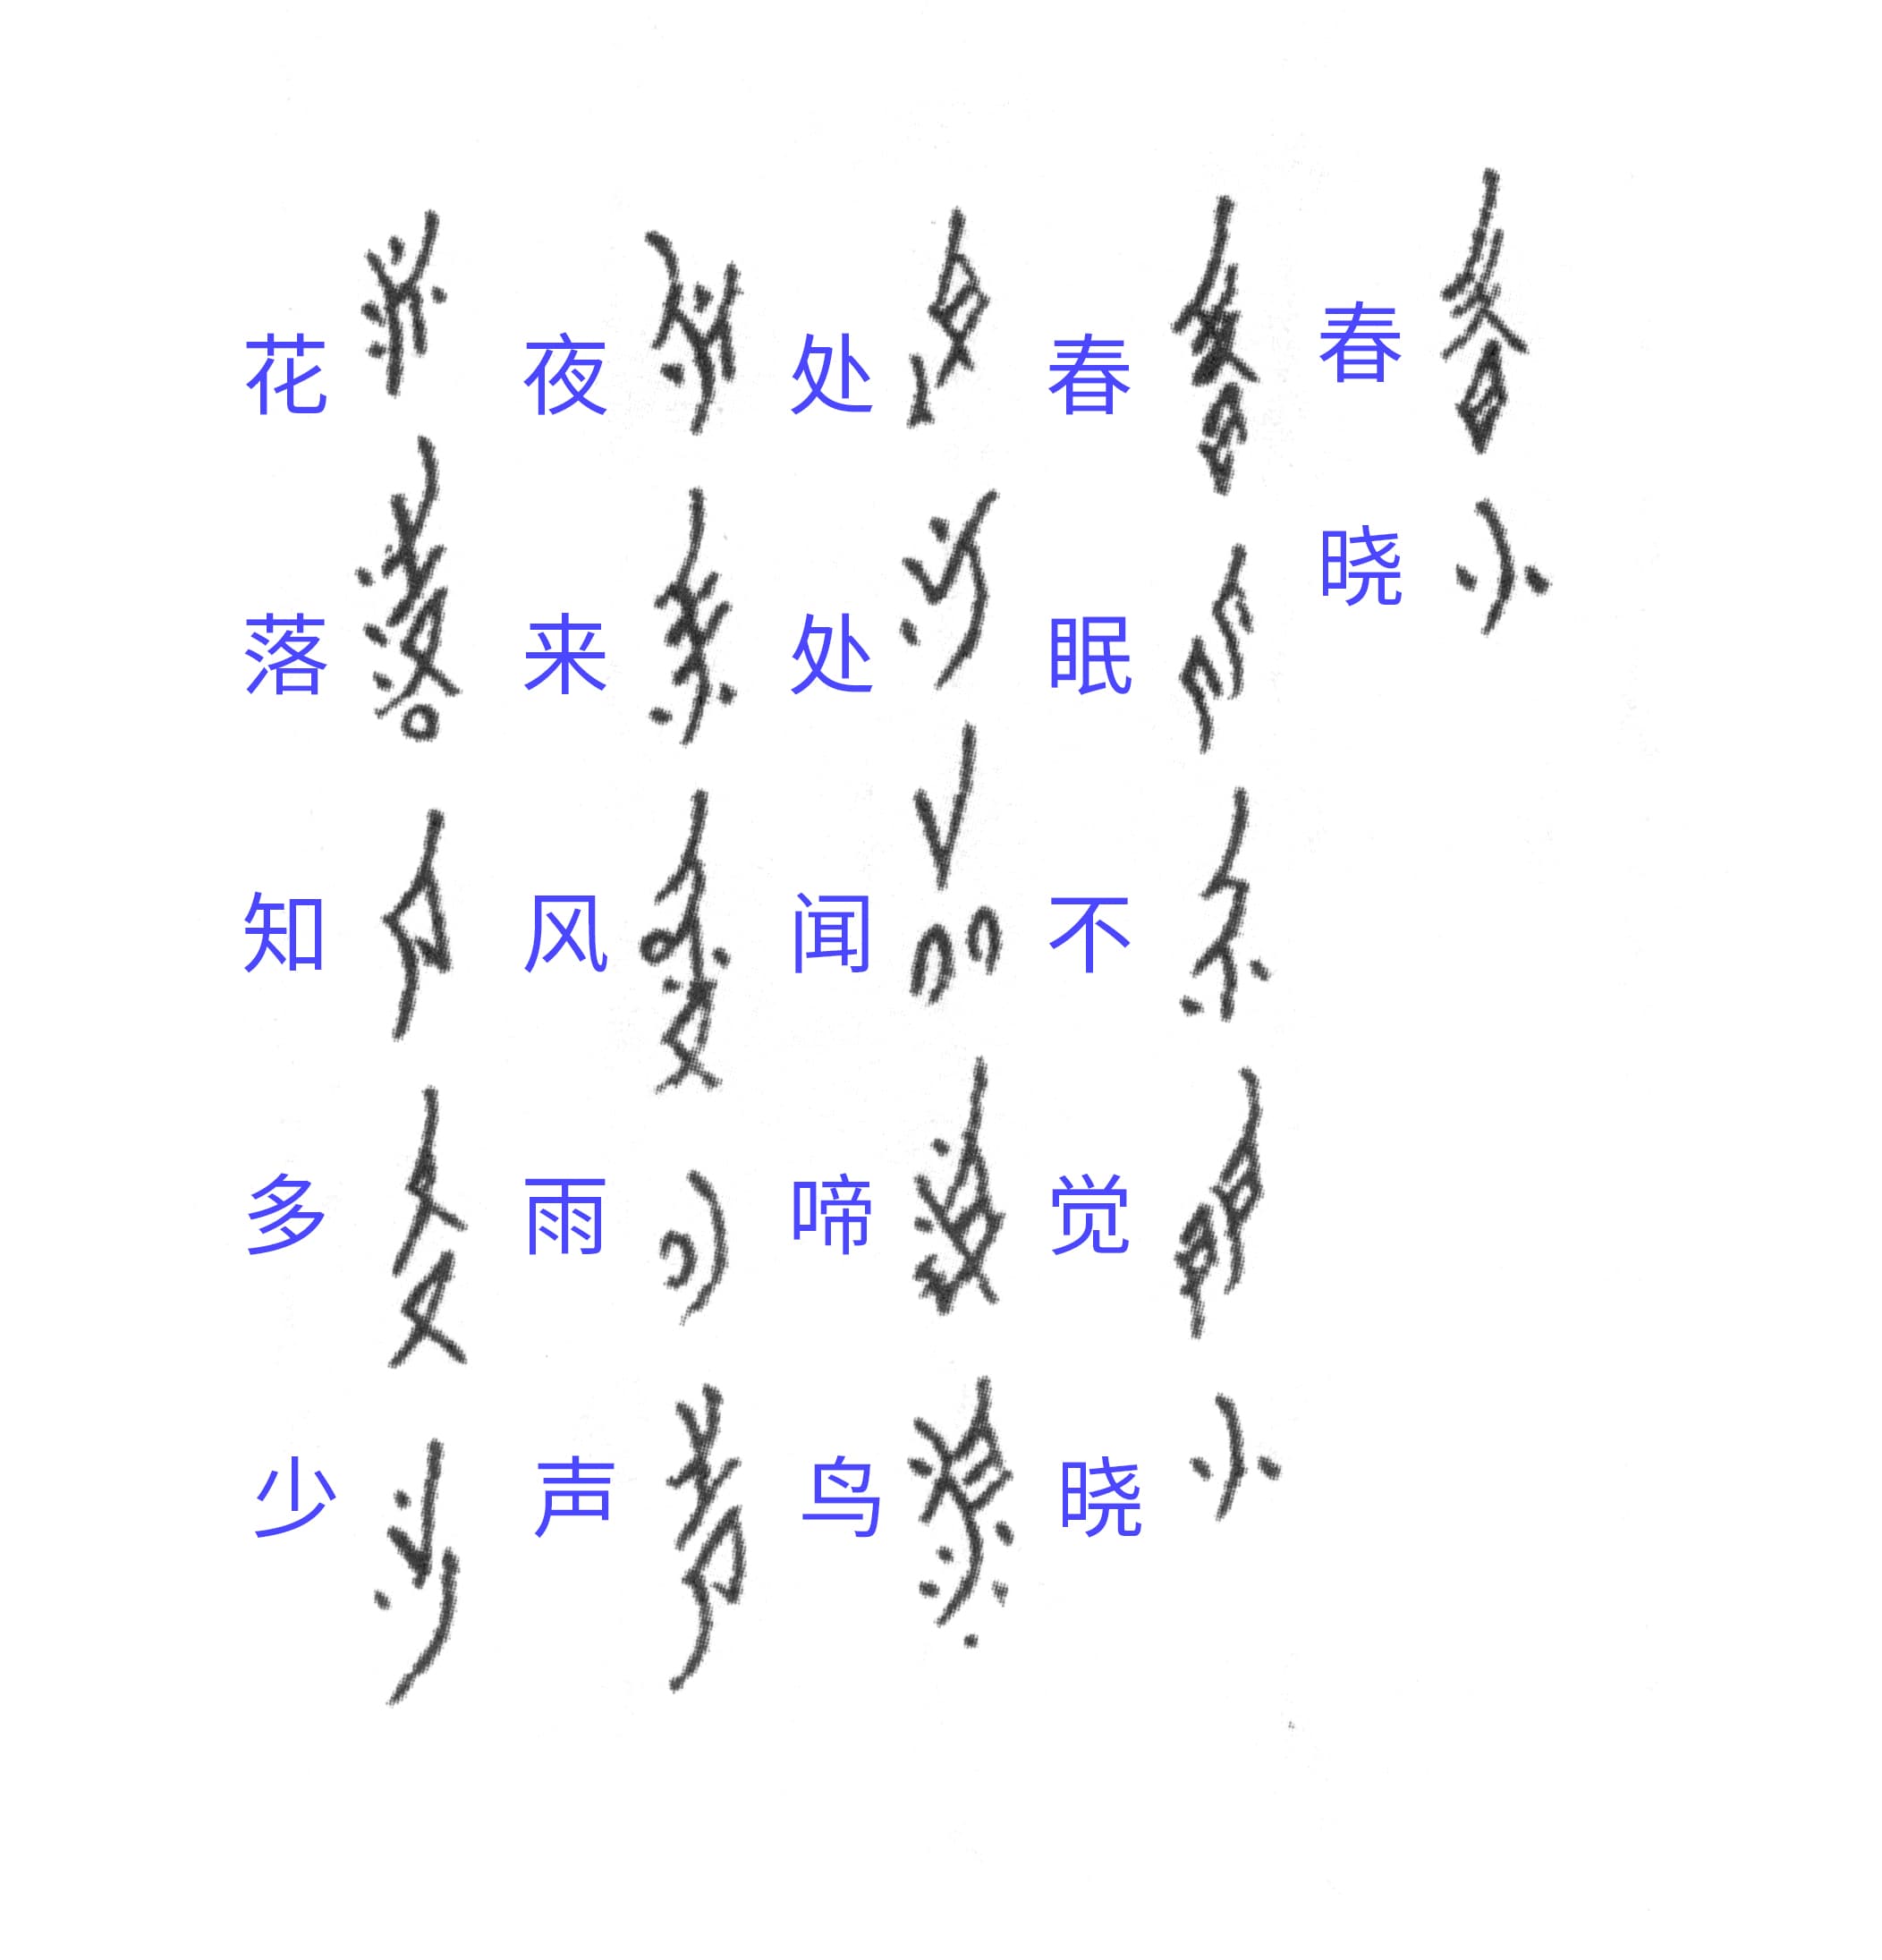 Dawn of Spring poem written in Nüshu script, with its Chinese transcription